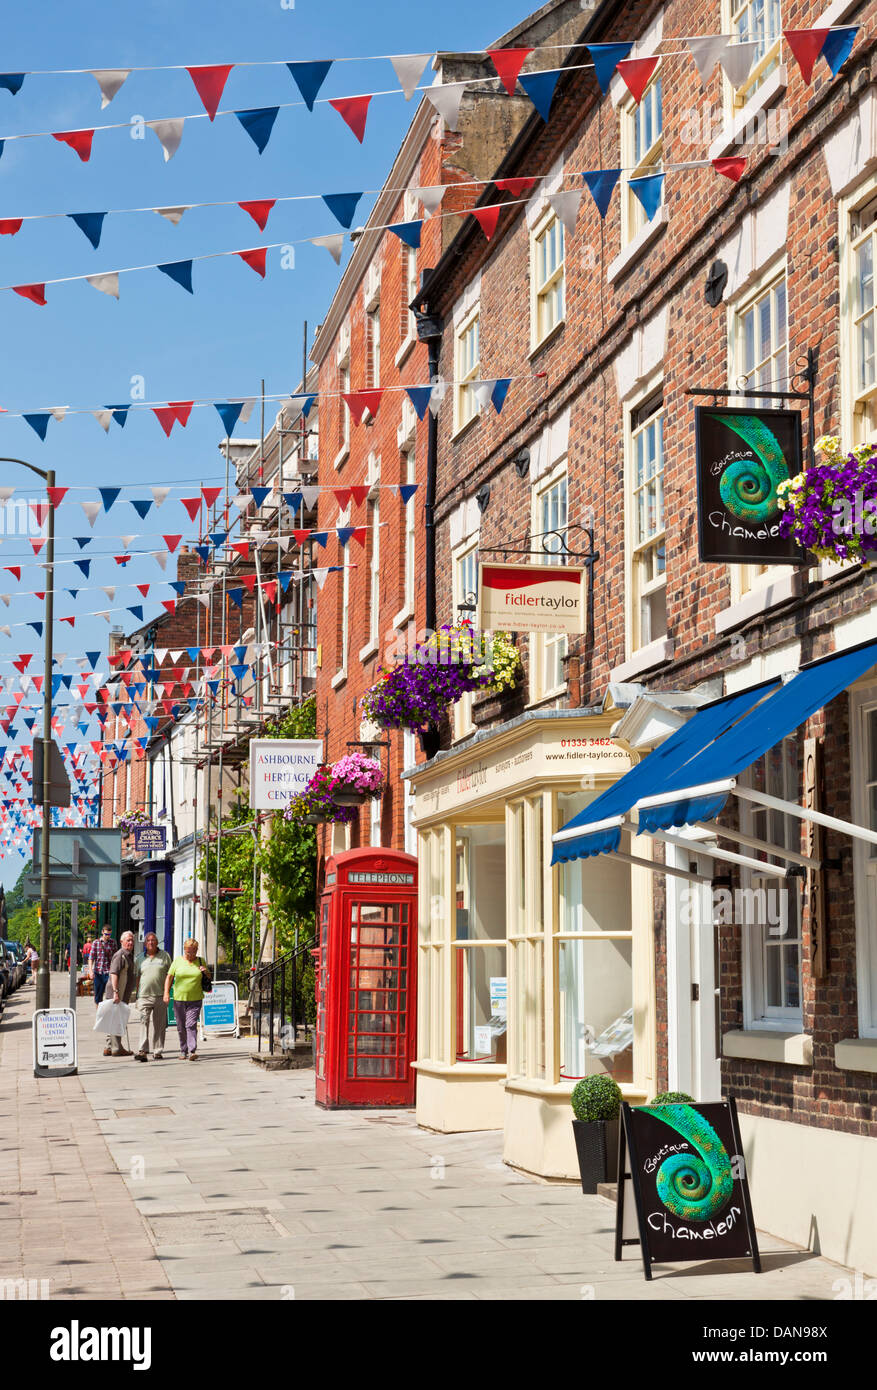 Town centre shopping street decked with bunting  Ashbourne Derbyshire England UK GB EU Europe Stock Photo